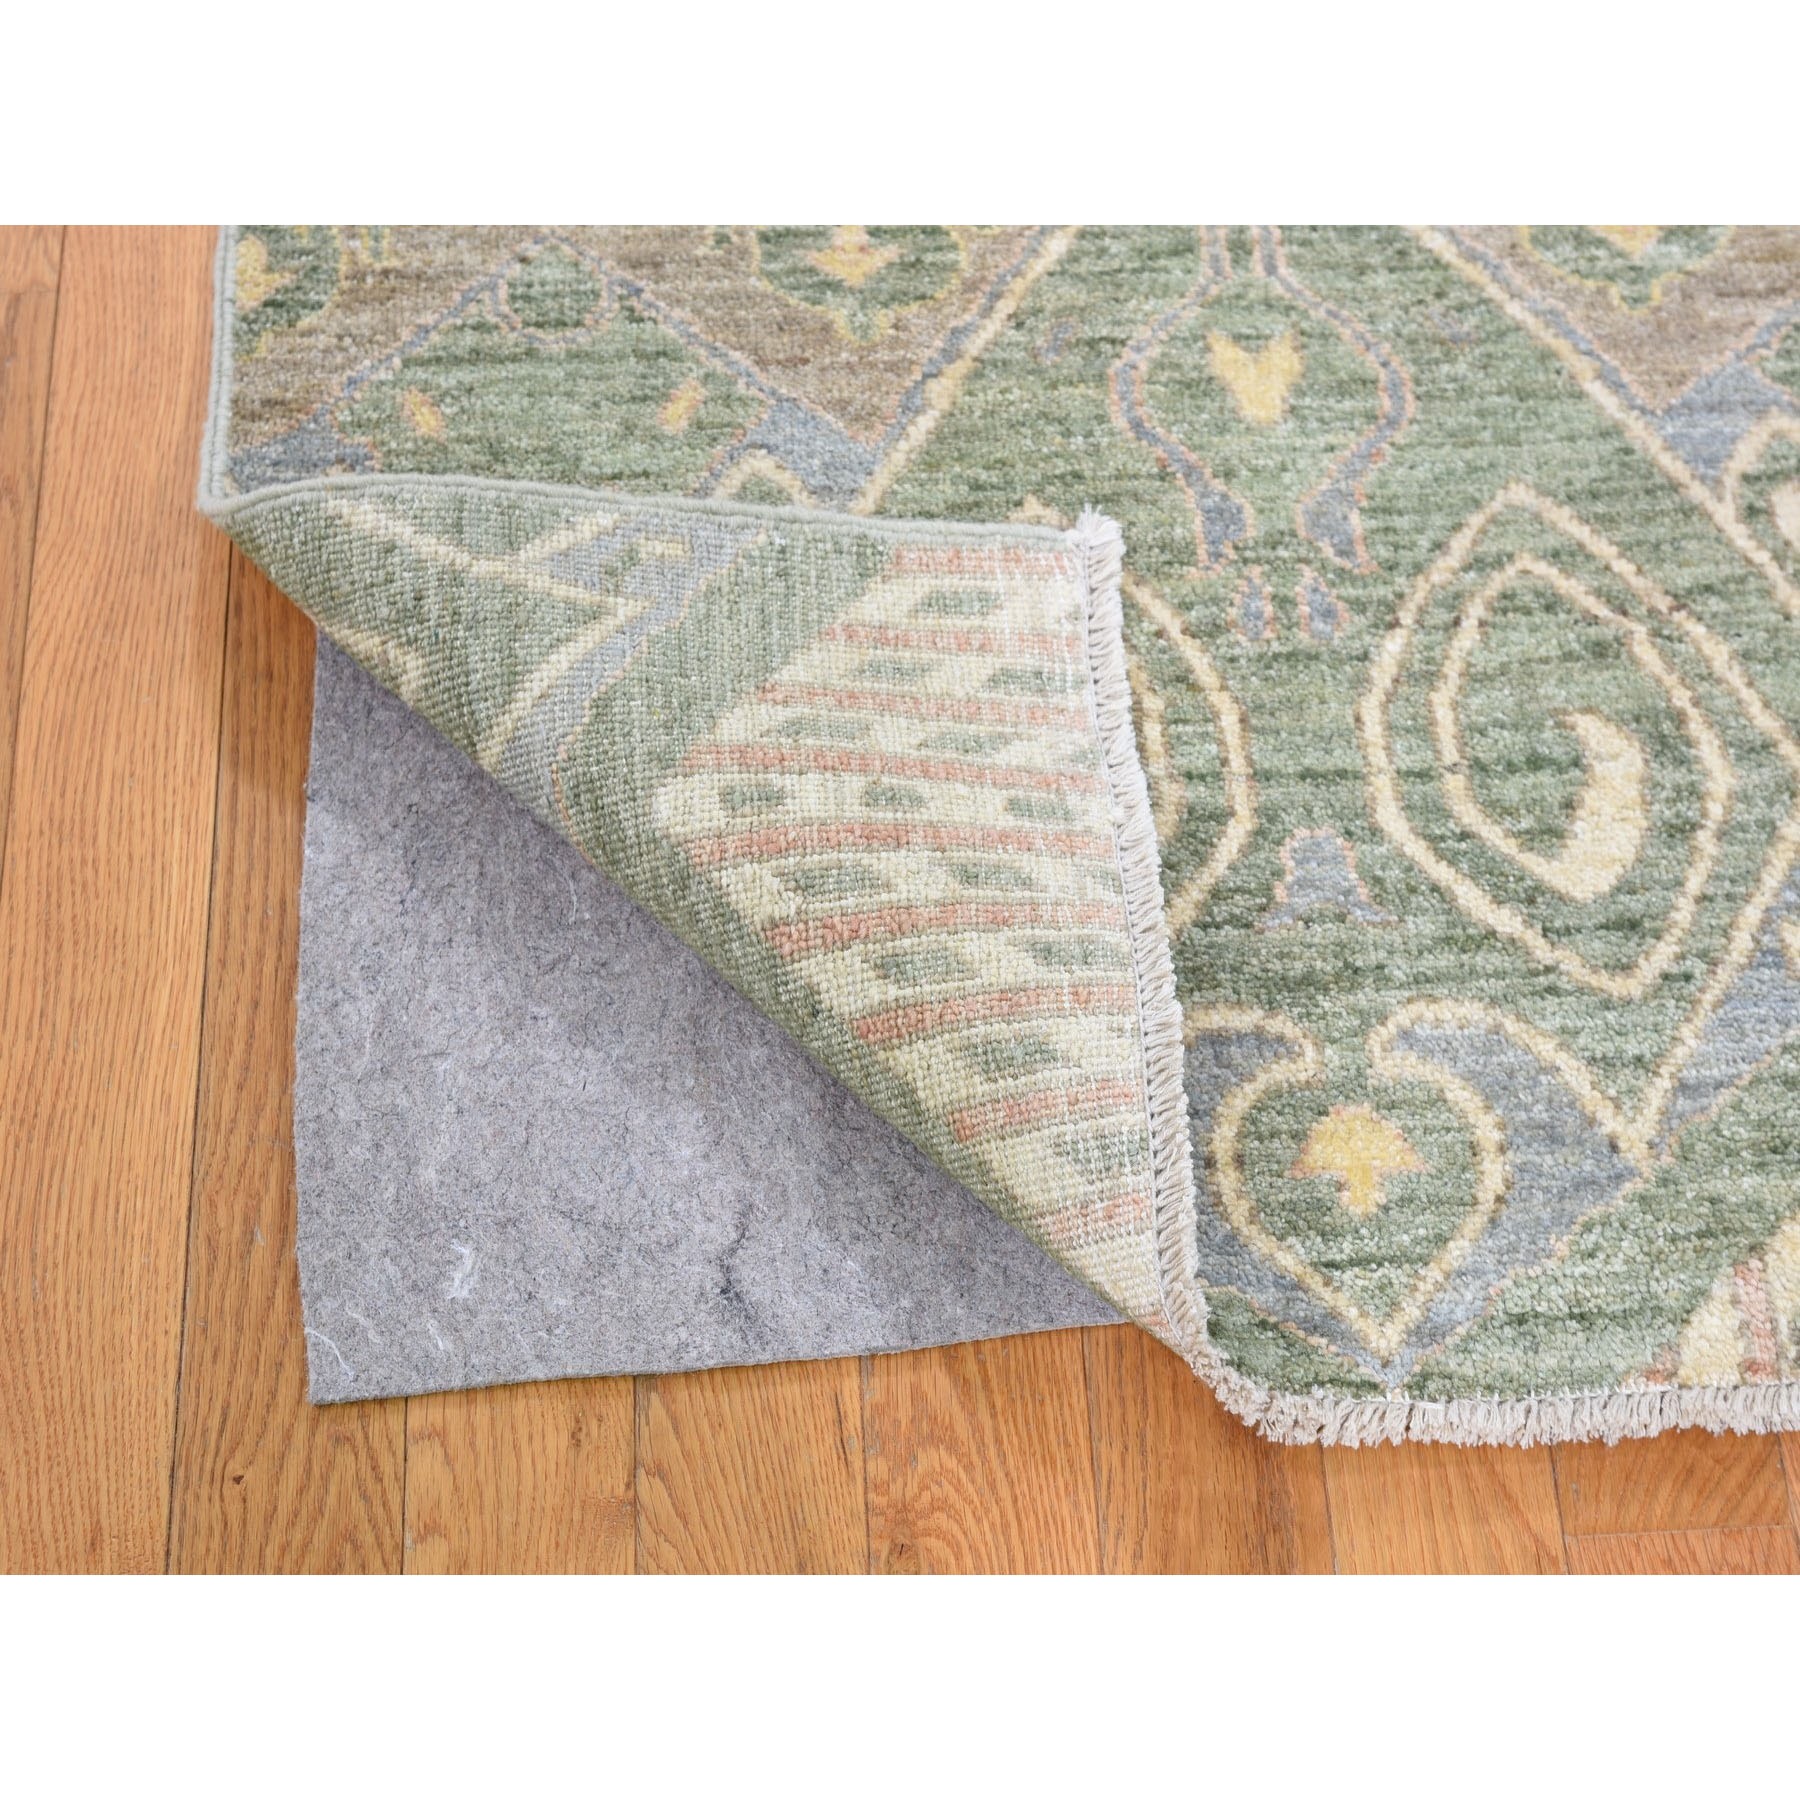  Wool Hand-Knotted Area Rug 5'1